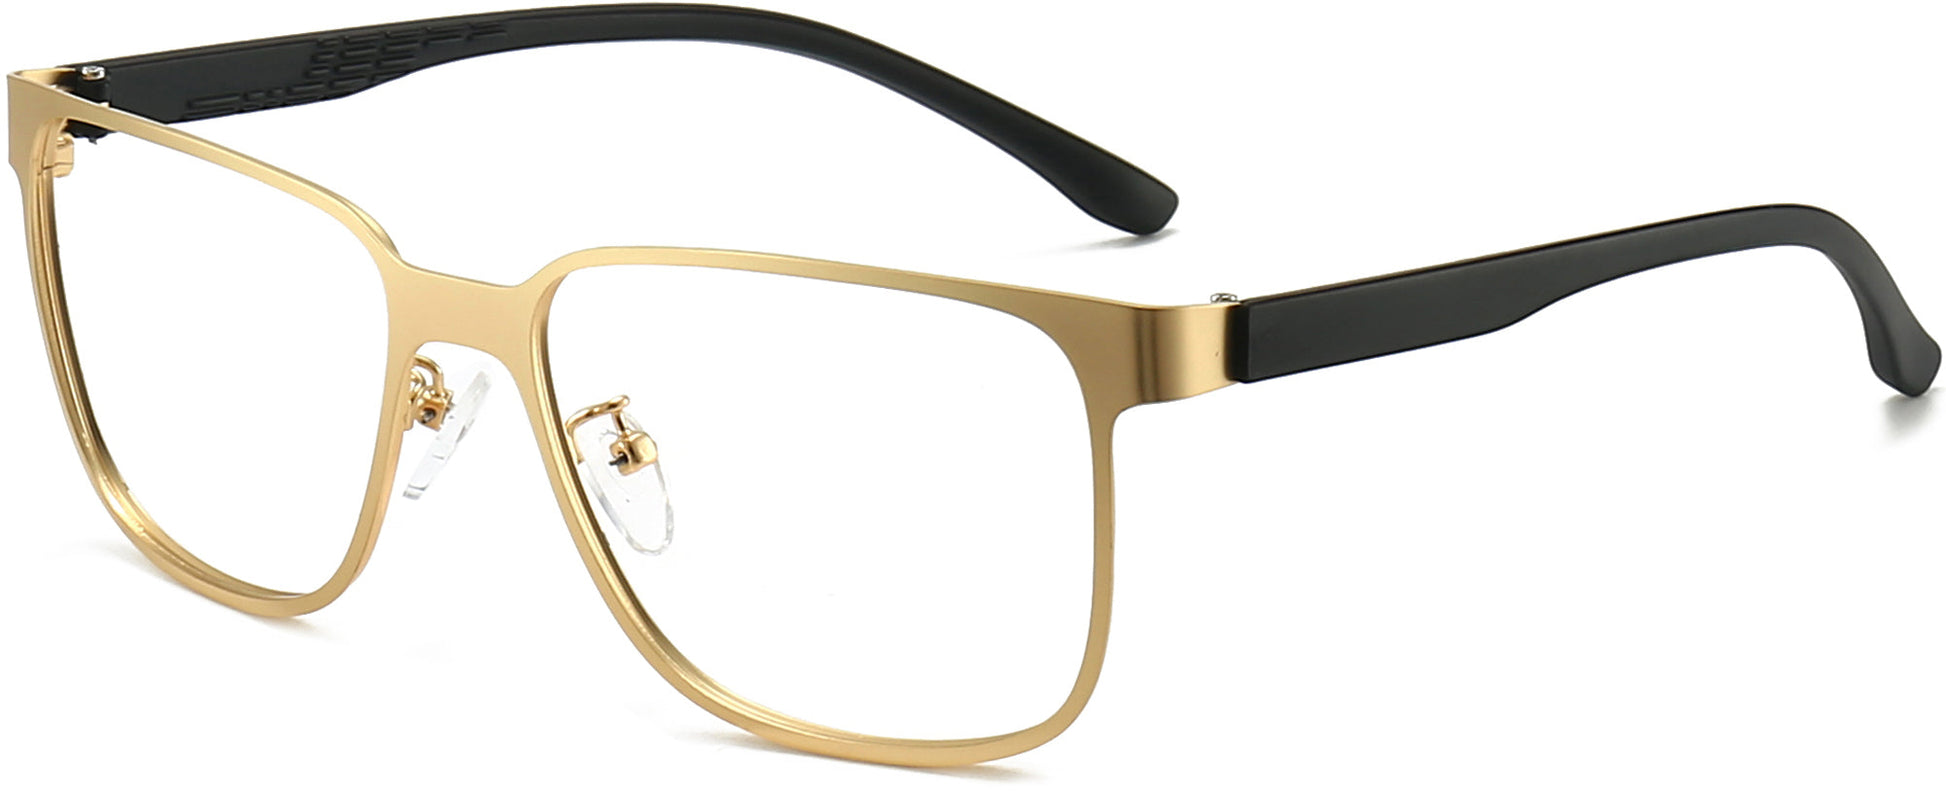 Danny Square Gold Eyeglasses from ANRRI, angle view